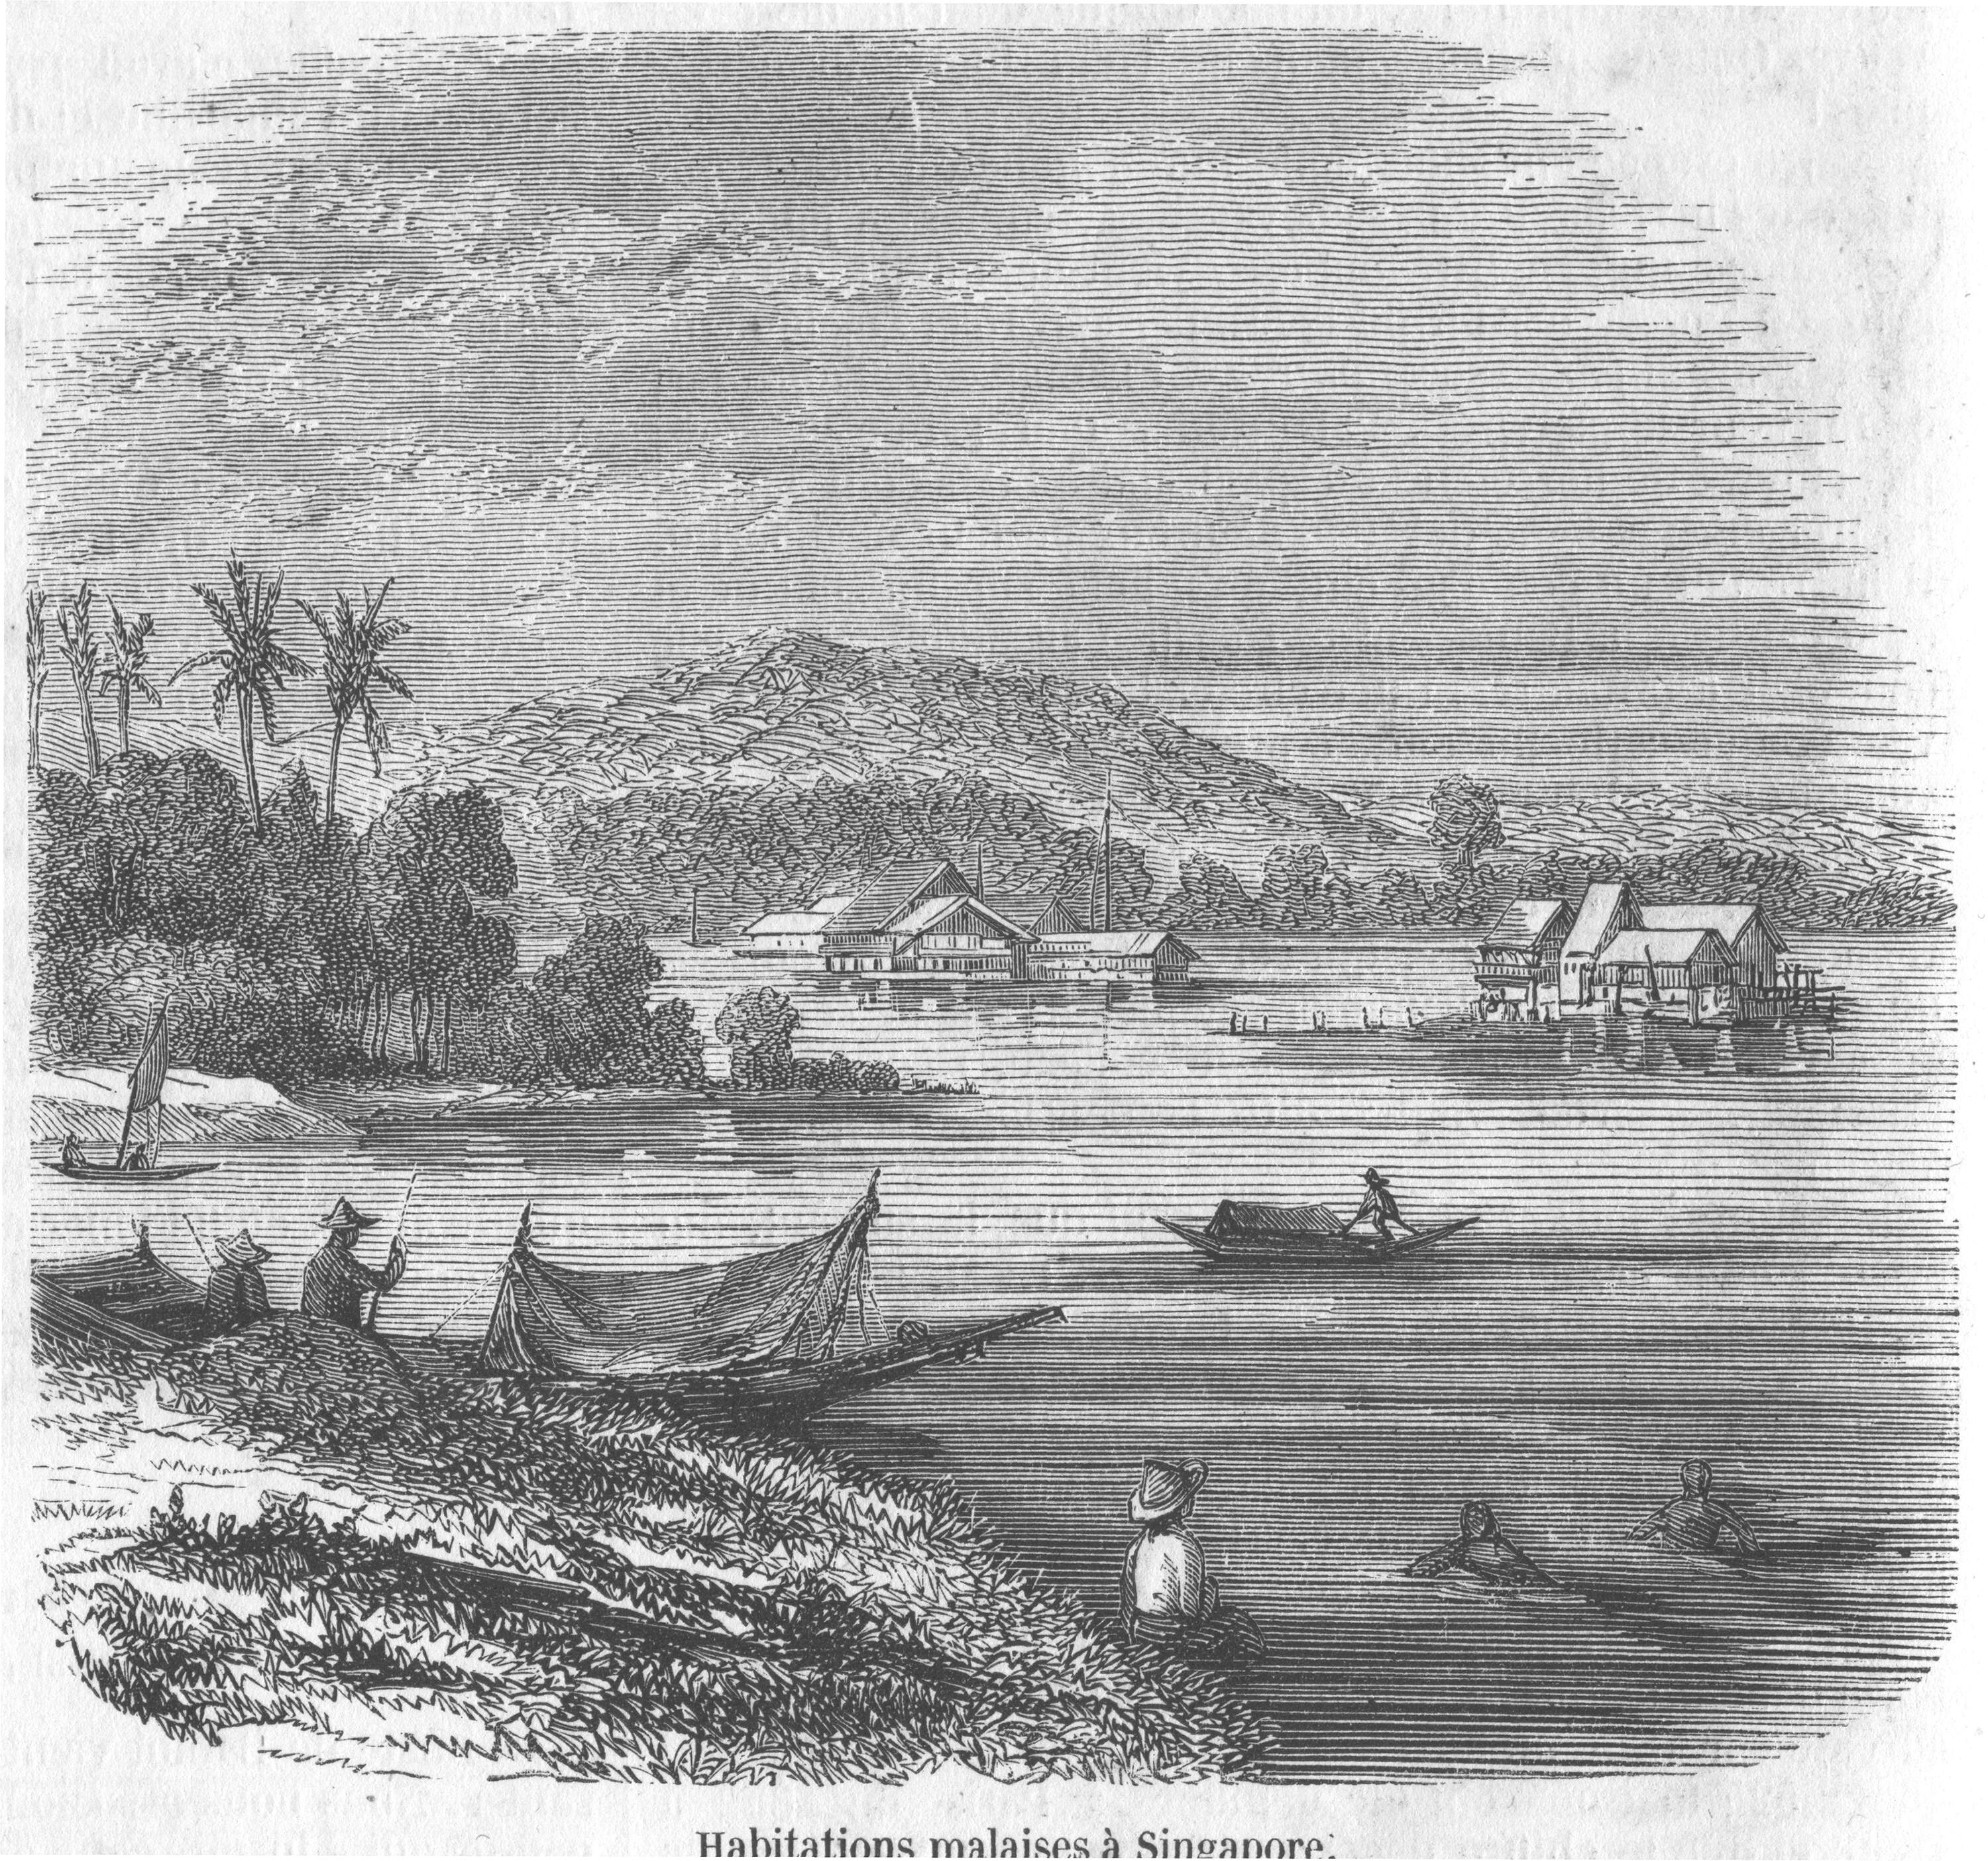 Malay Dwellings in Singapore – Old Book Illustrations